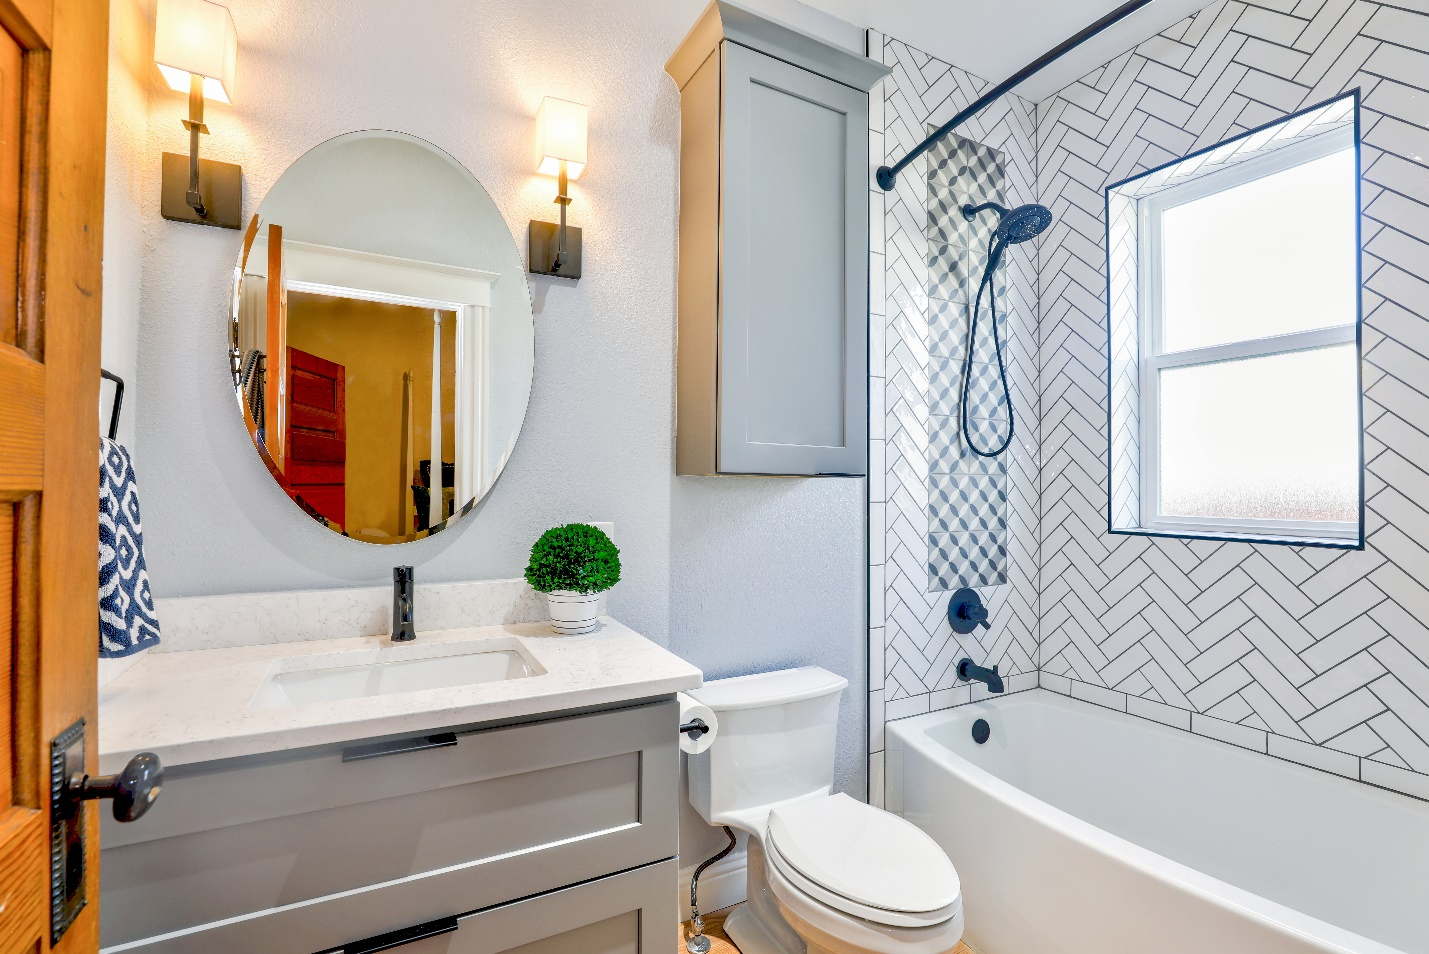 How to make your small bathroom look bigger